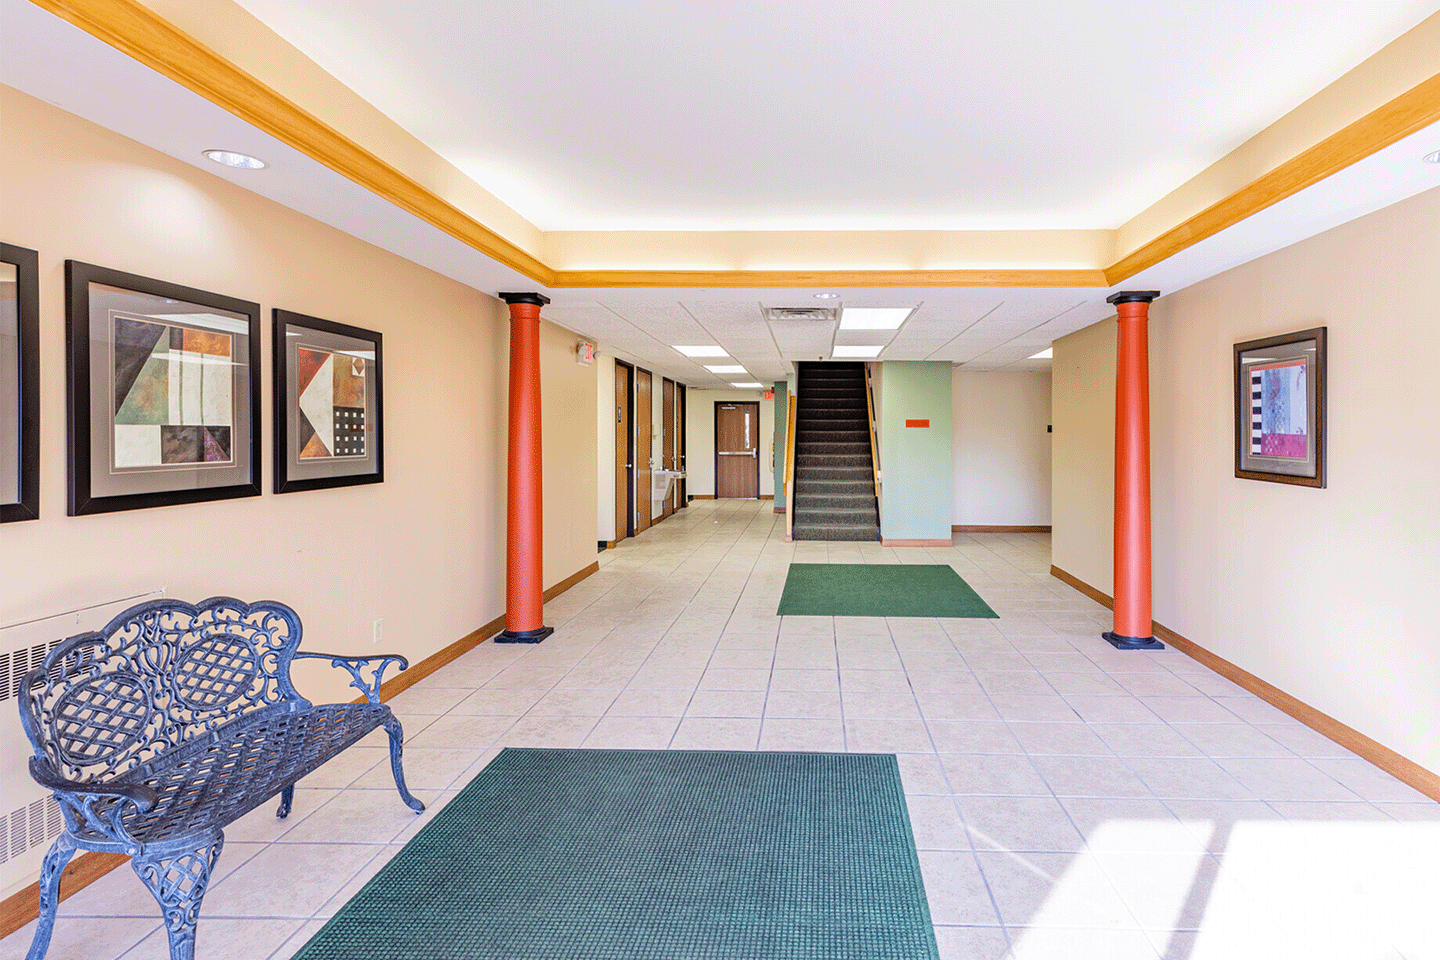 building entry way with long hallway and waiting area with benches